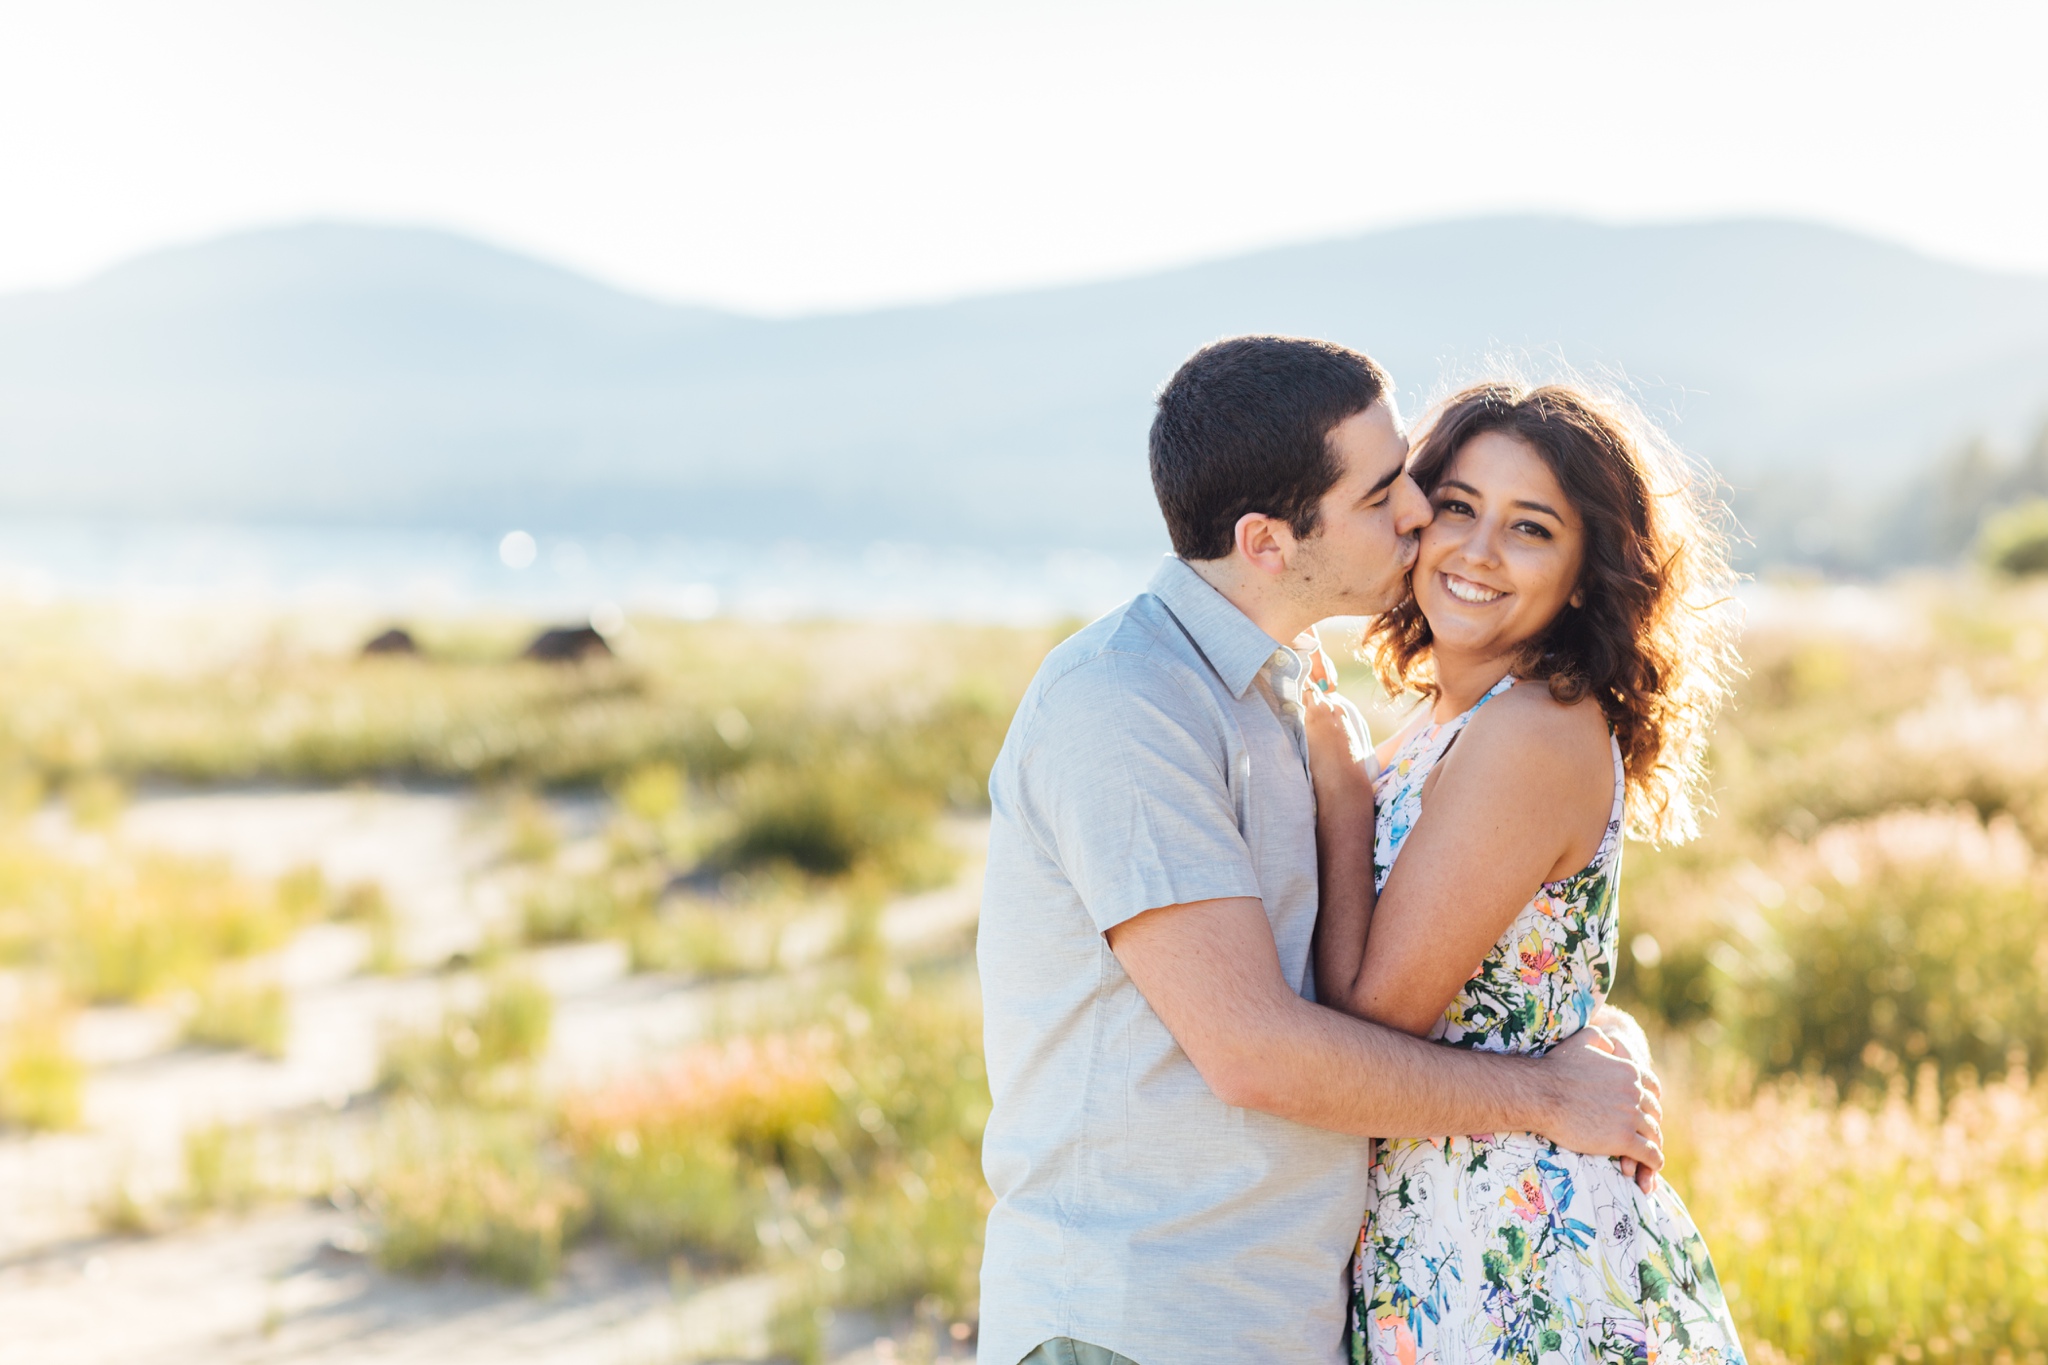 thedelauras_ostaraphotography_laketahoeengagement_laketahoeweddingphotograph_laketahoe_photographer_010